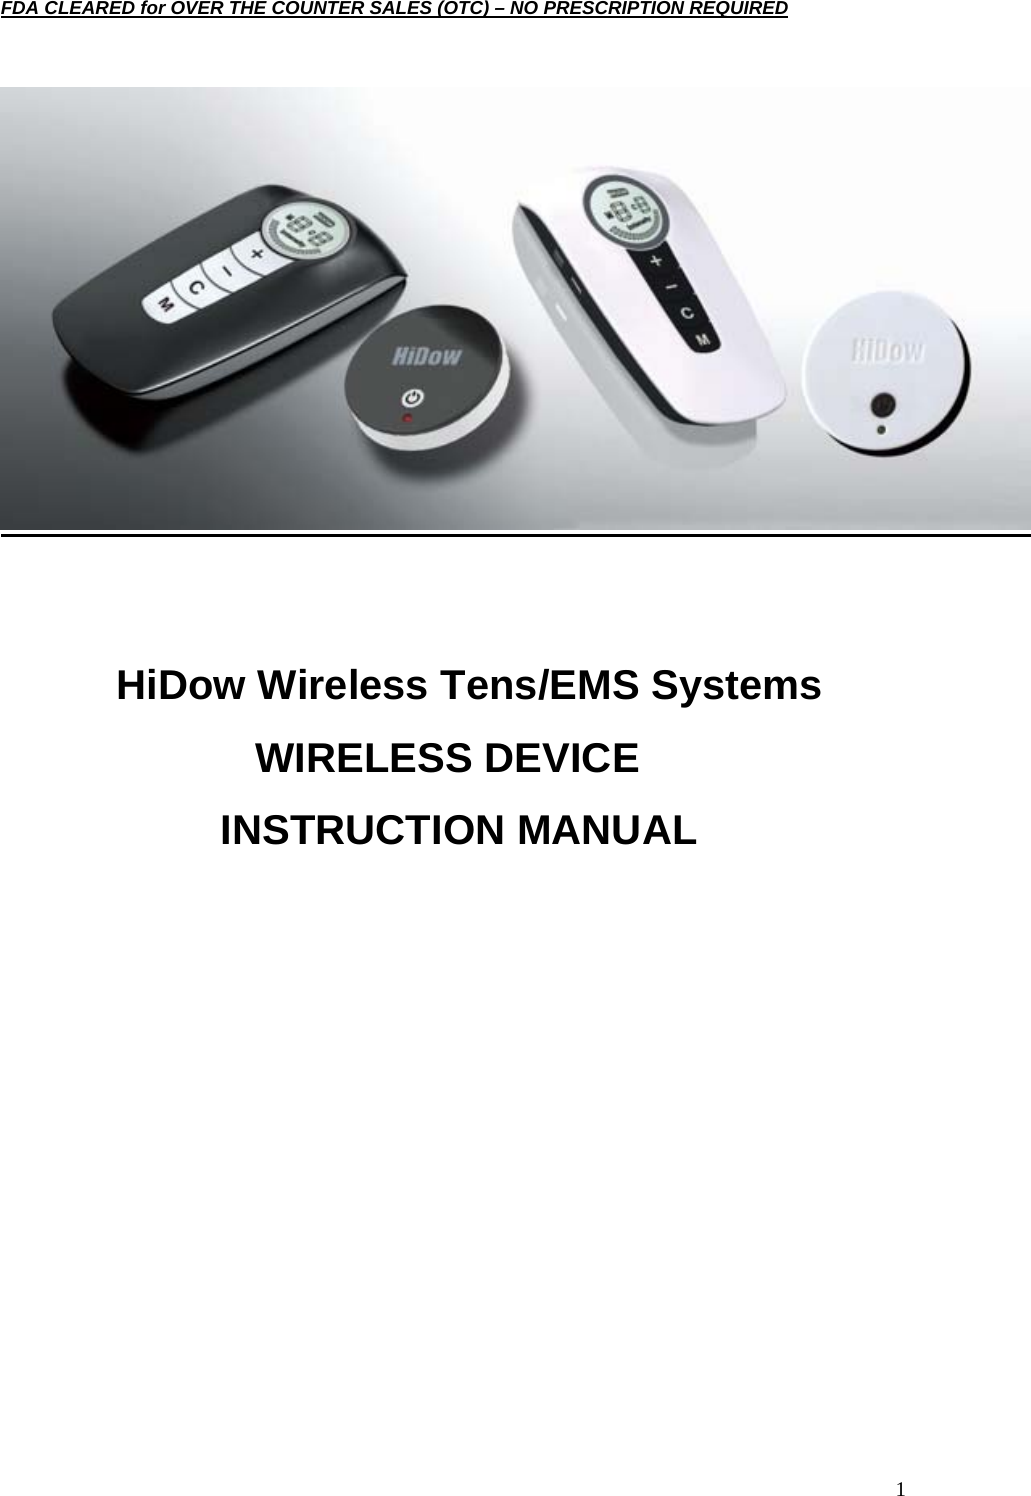  1FDA CLEARED for OVER THE COUNTER SALES (OTC) – NO PRESCRIPTION REQUIRED               HiDow Wireless Tens/EMS Systems                       WIRELESS DEVICE  INSTRUCTION MANUAL            